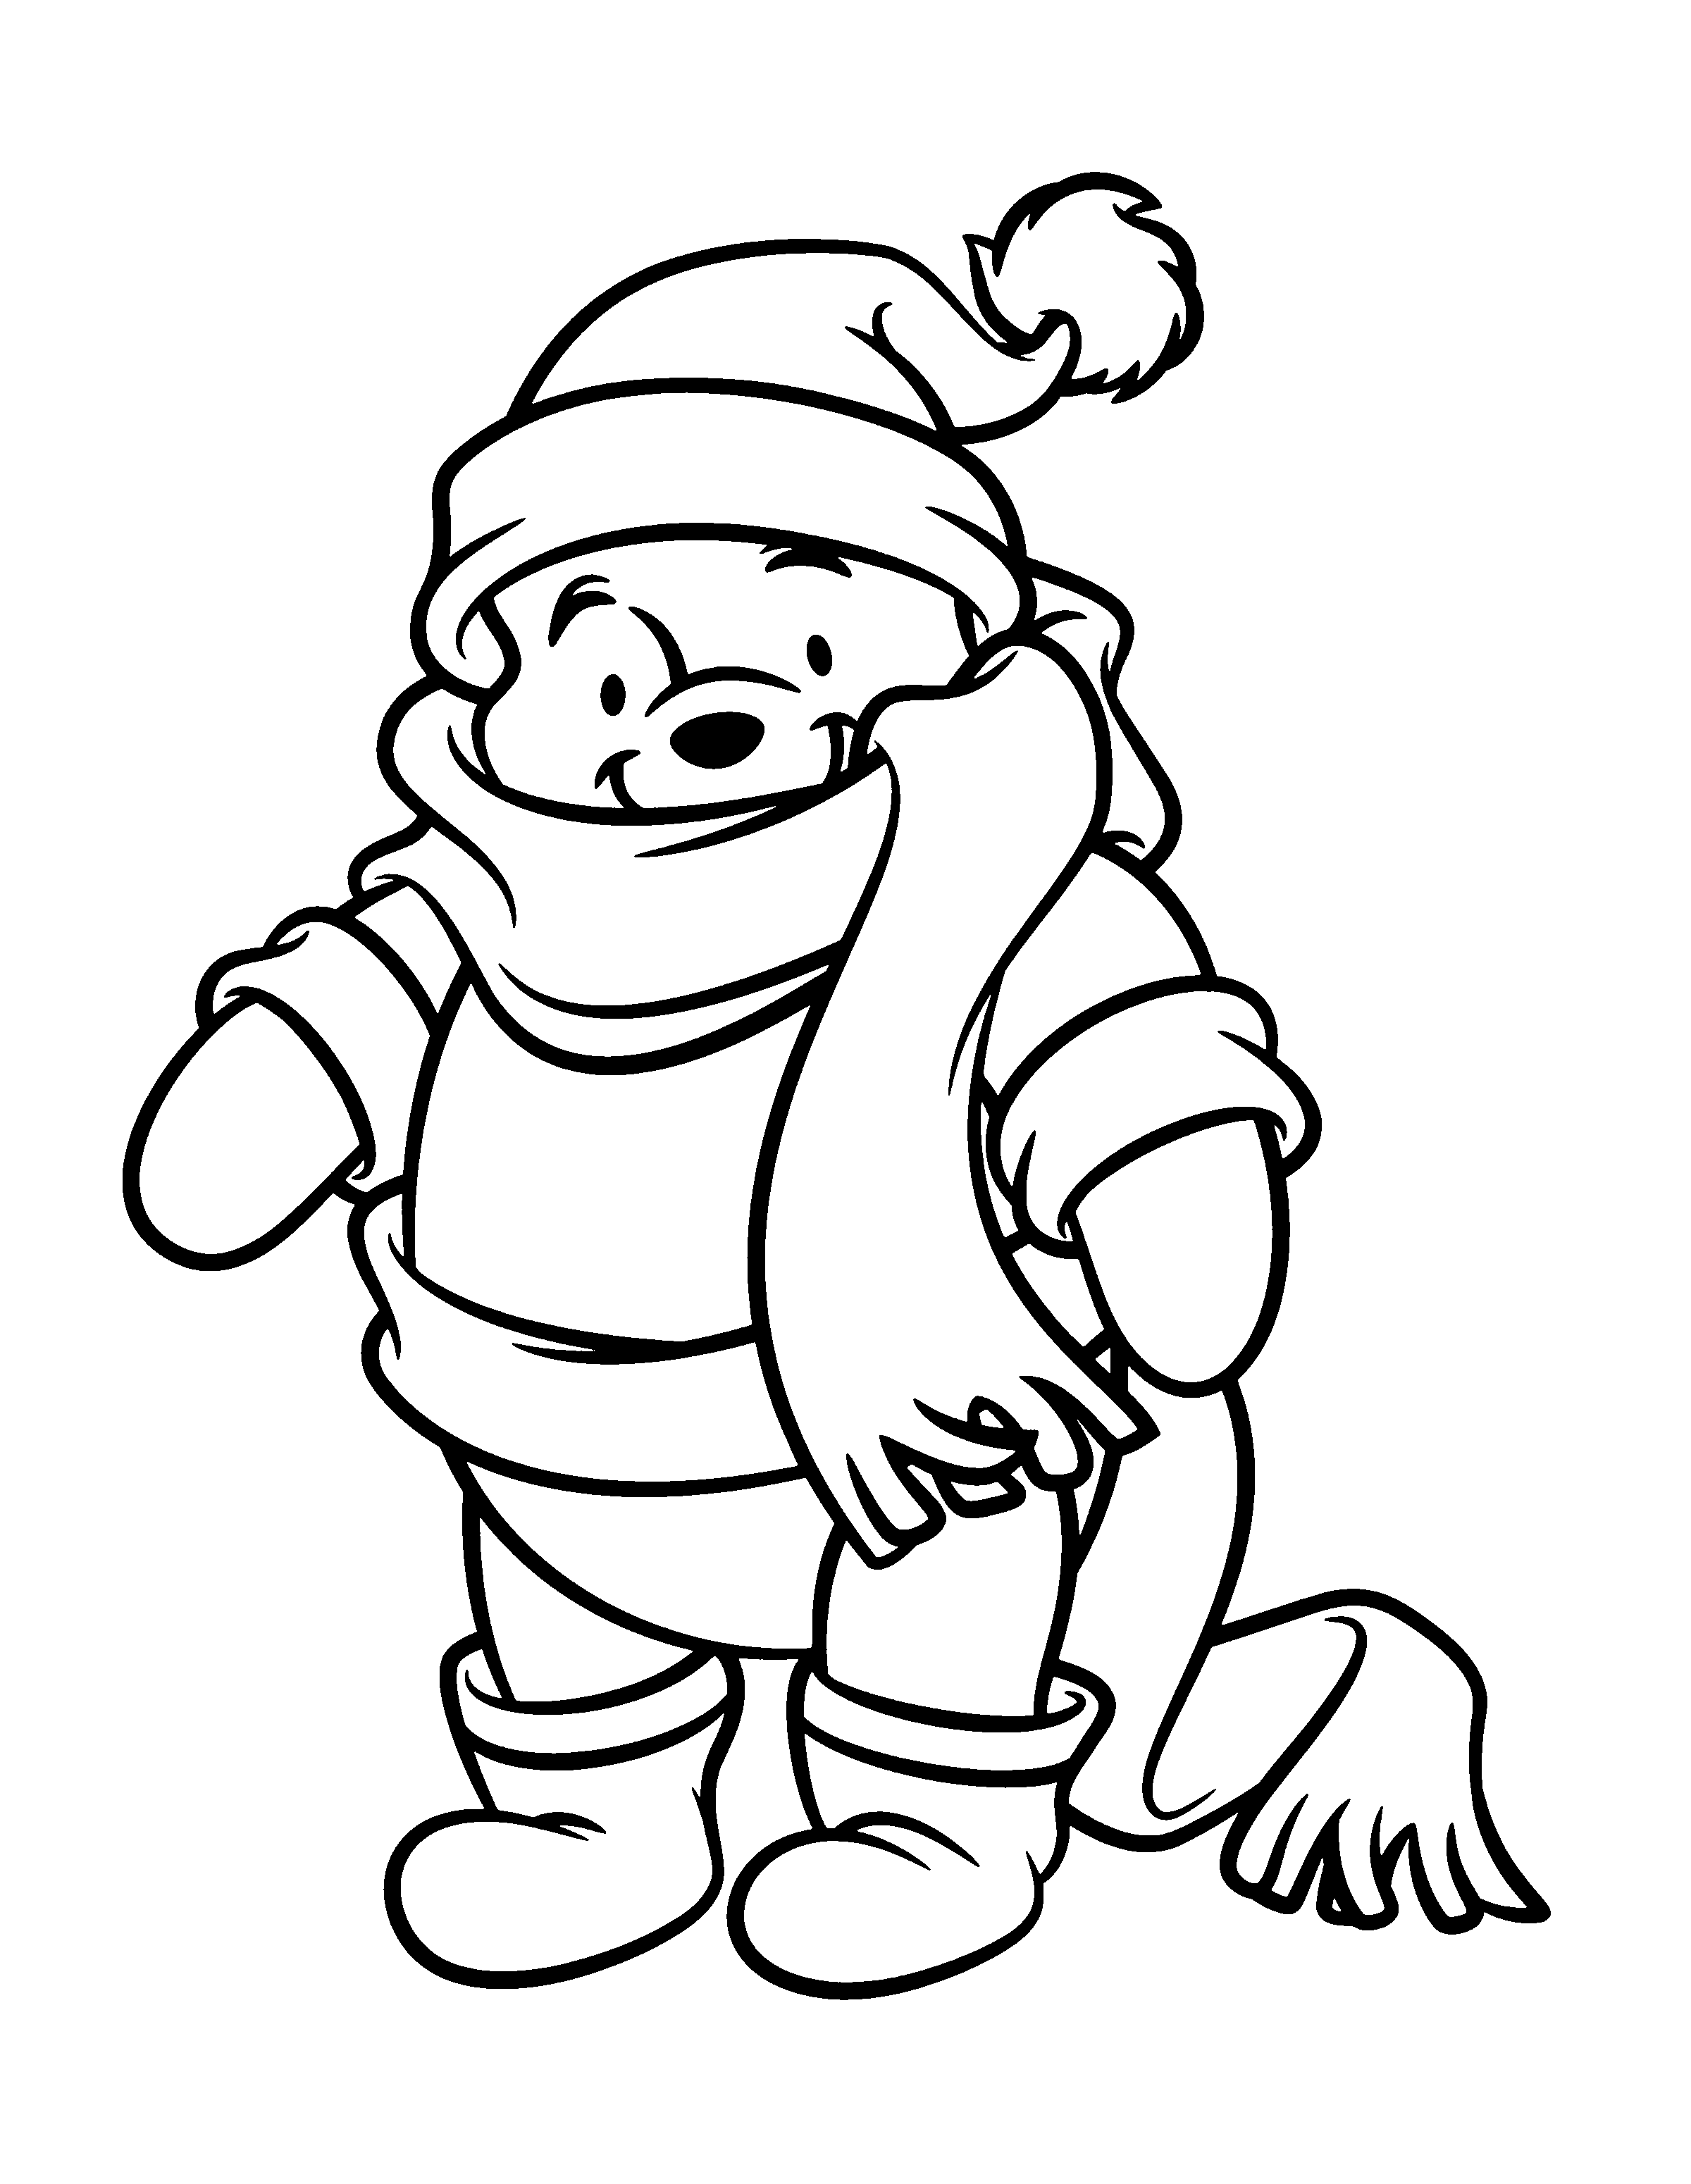 Winnie the Pooh and Tigger coloring page